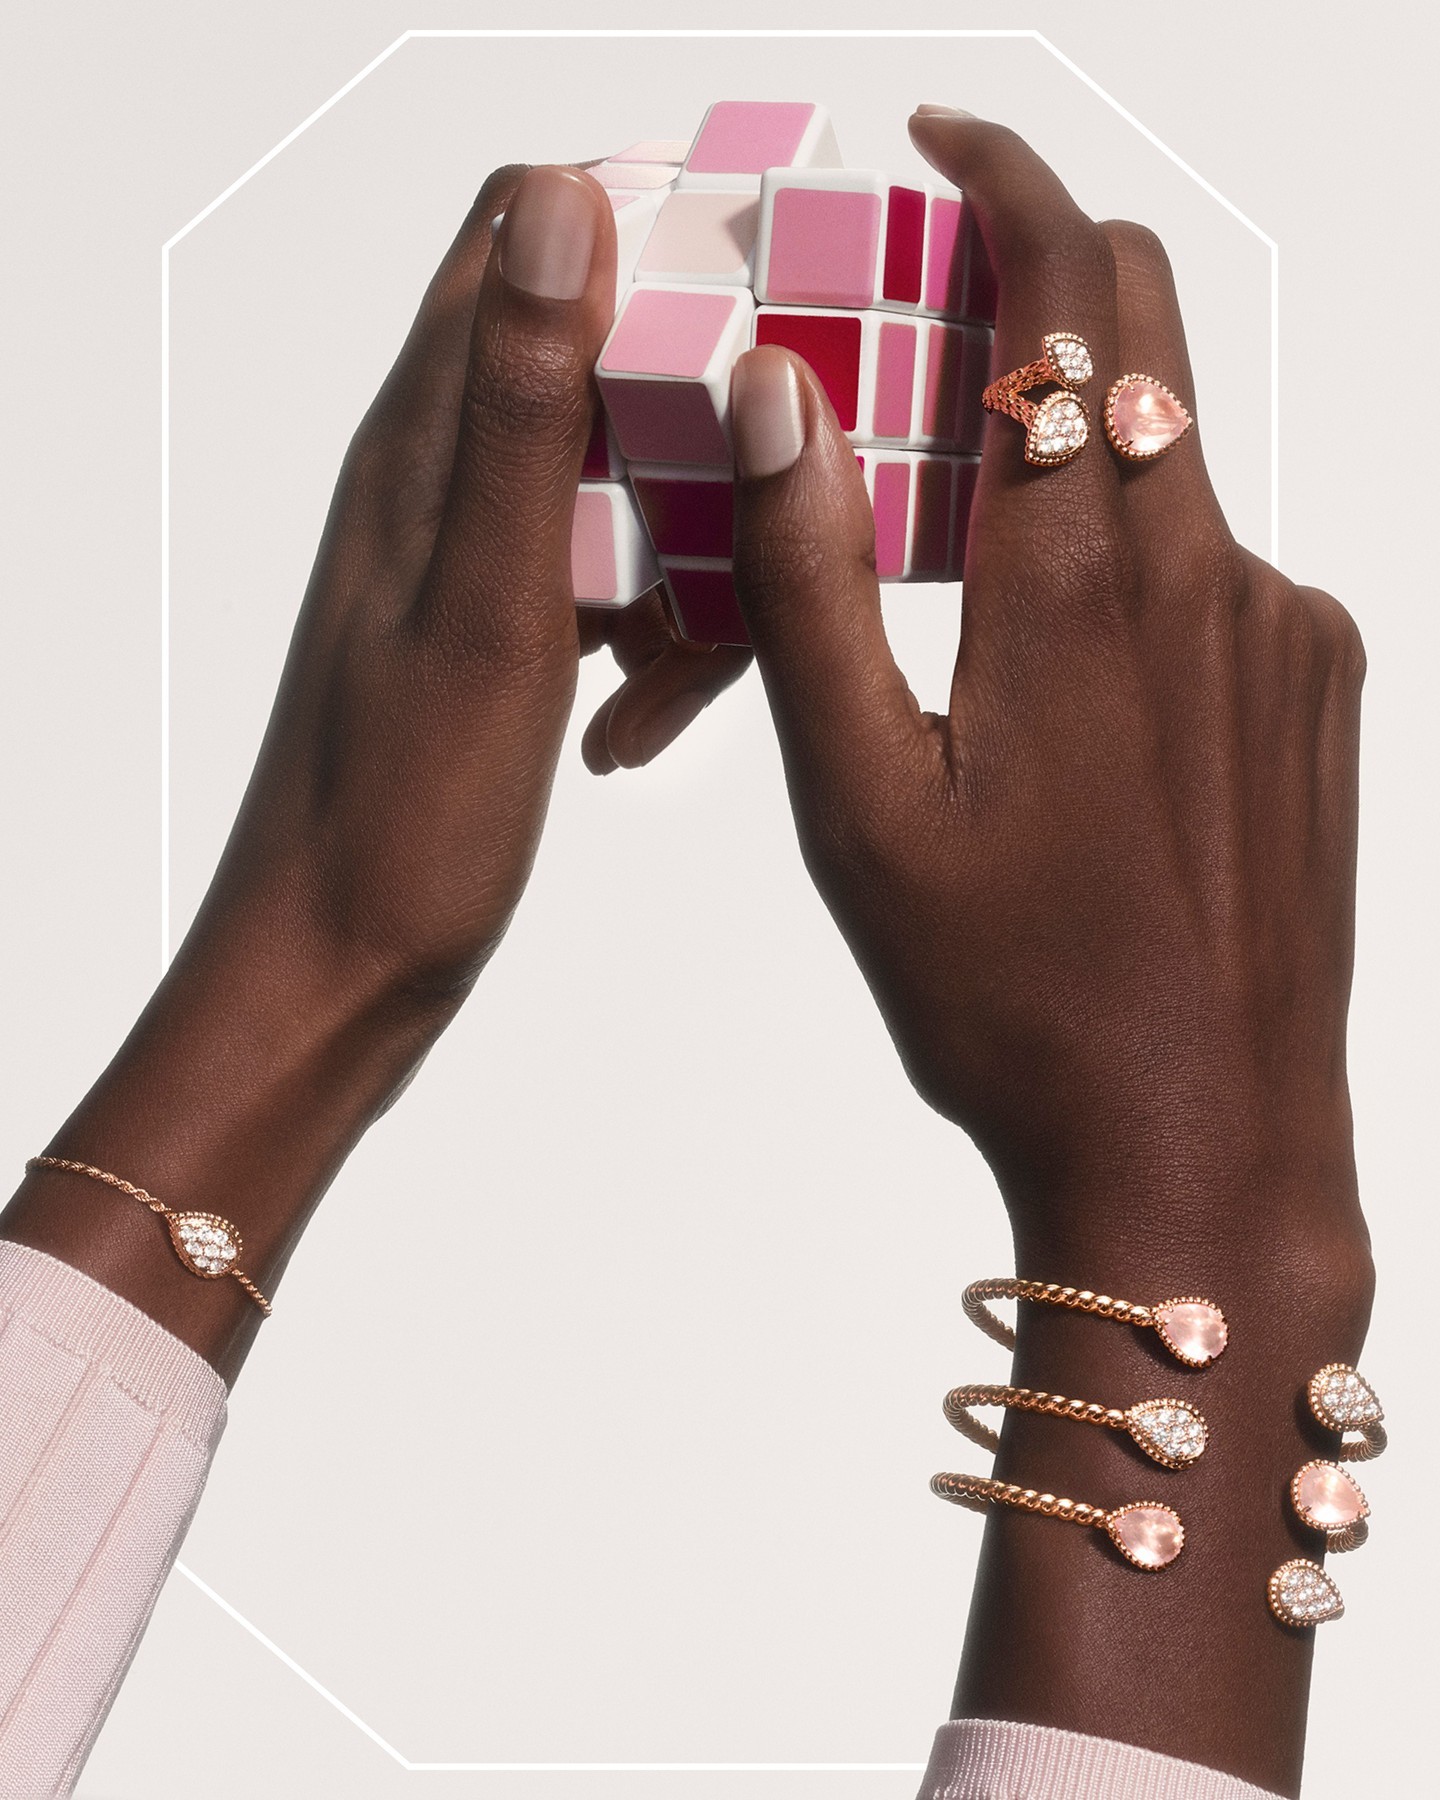 Picture of a models hands playing with a pink Rubix Cube while wearing Boucheron jewellery.